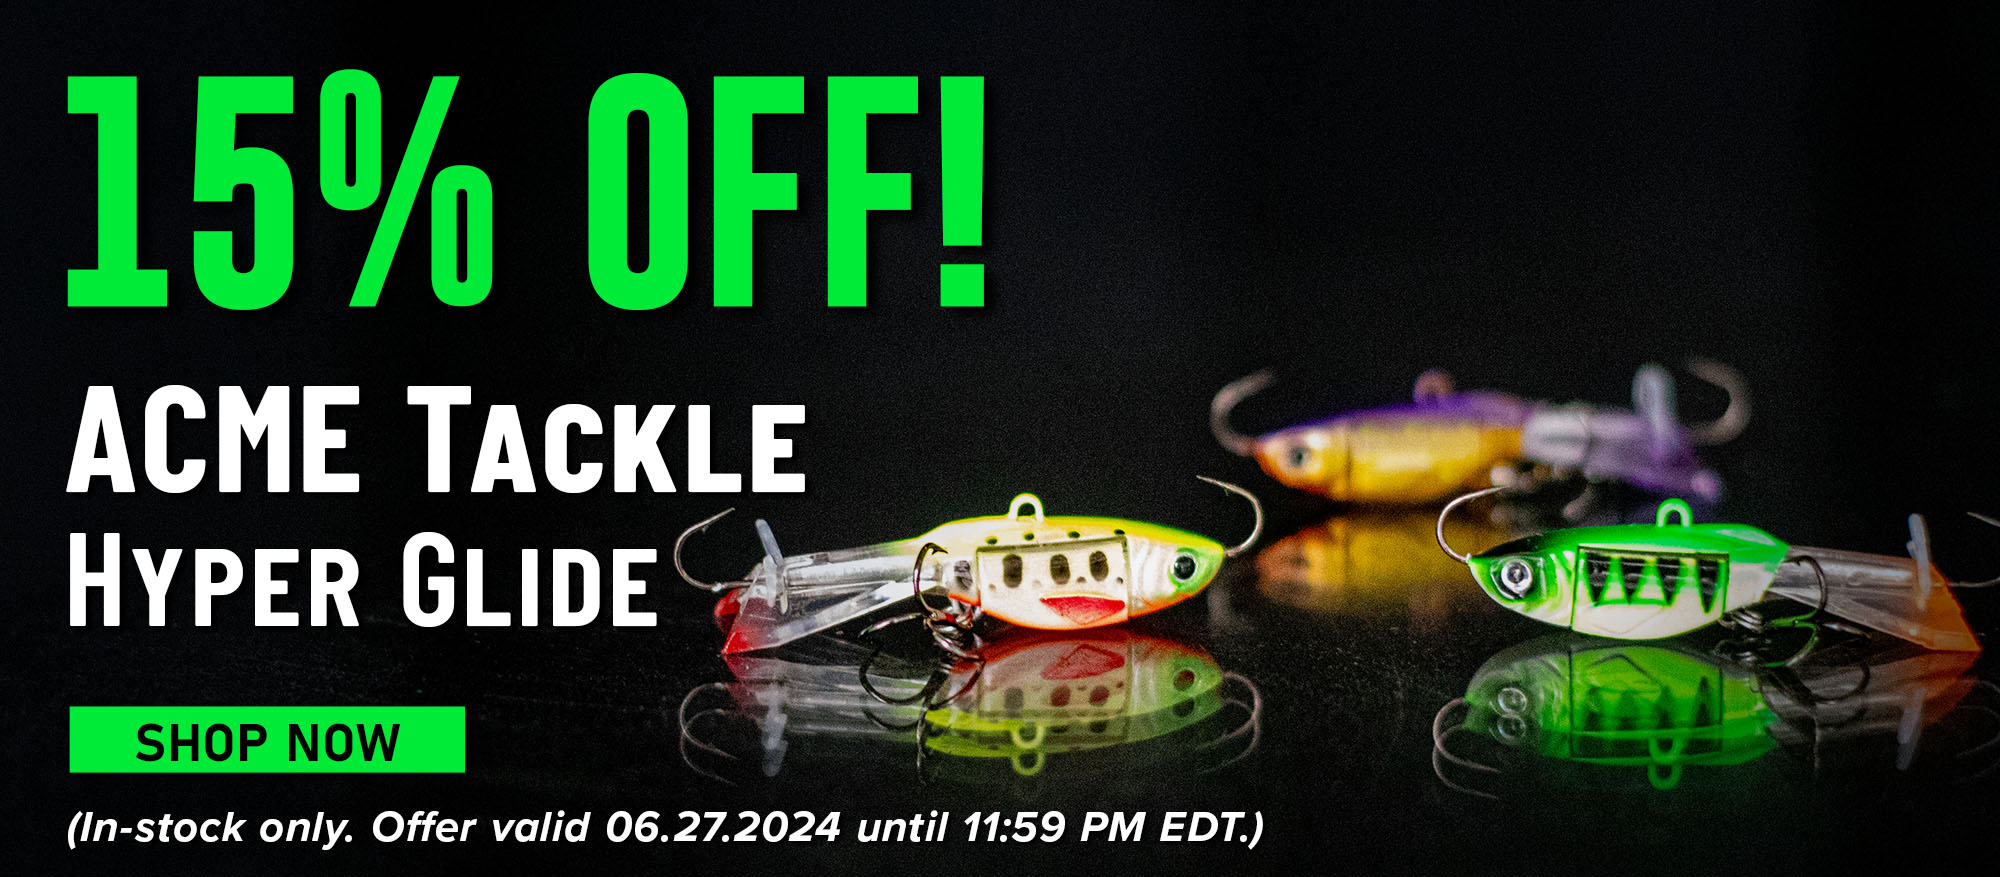 15% Off! ACME Tackle Hyper Glide Shop Now (In-stock only. Offer valid 06.27.2024 until 11:59 PM EDT.)